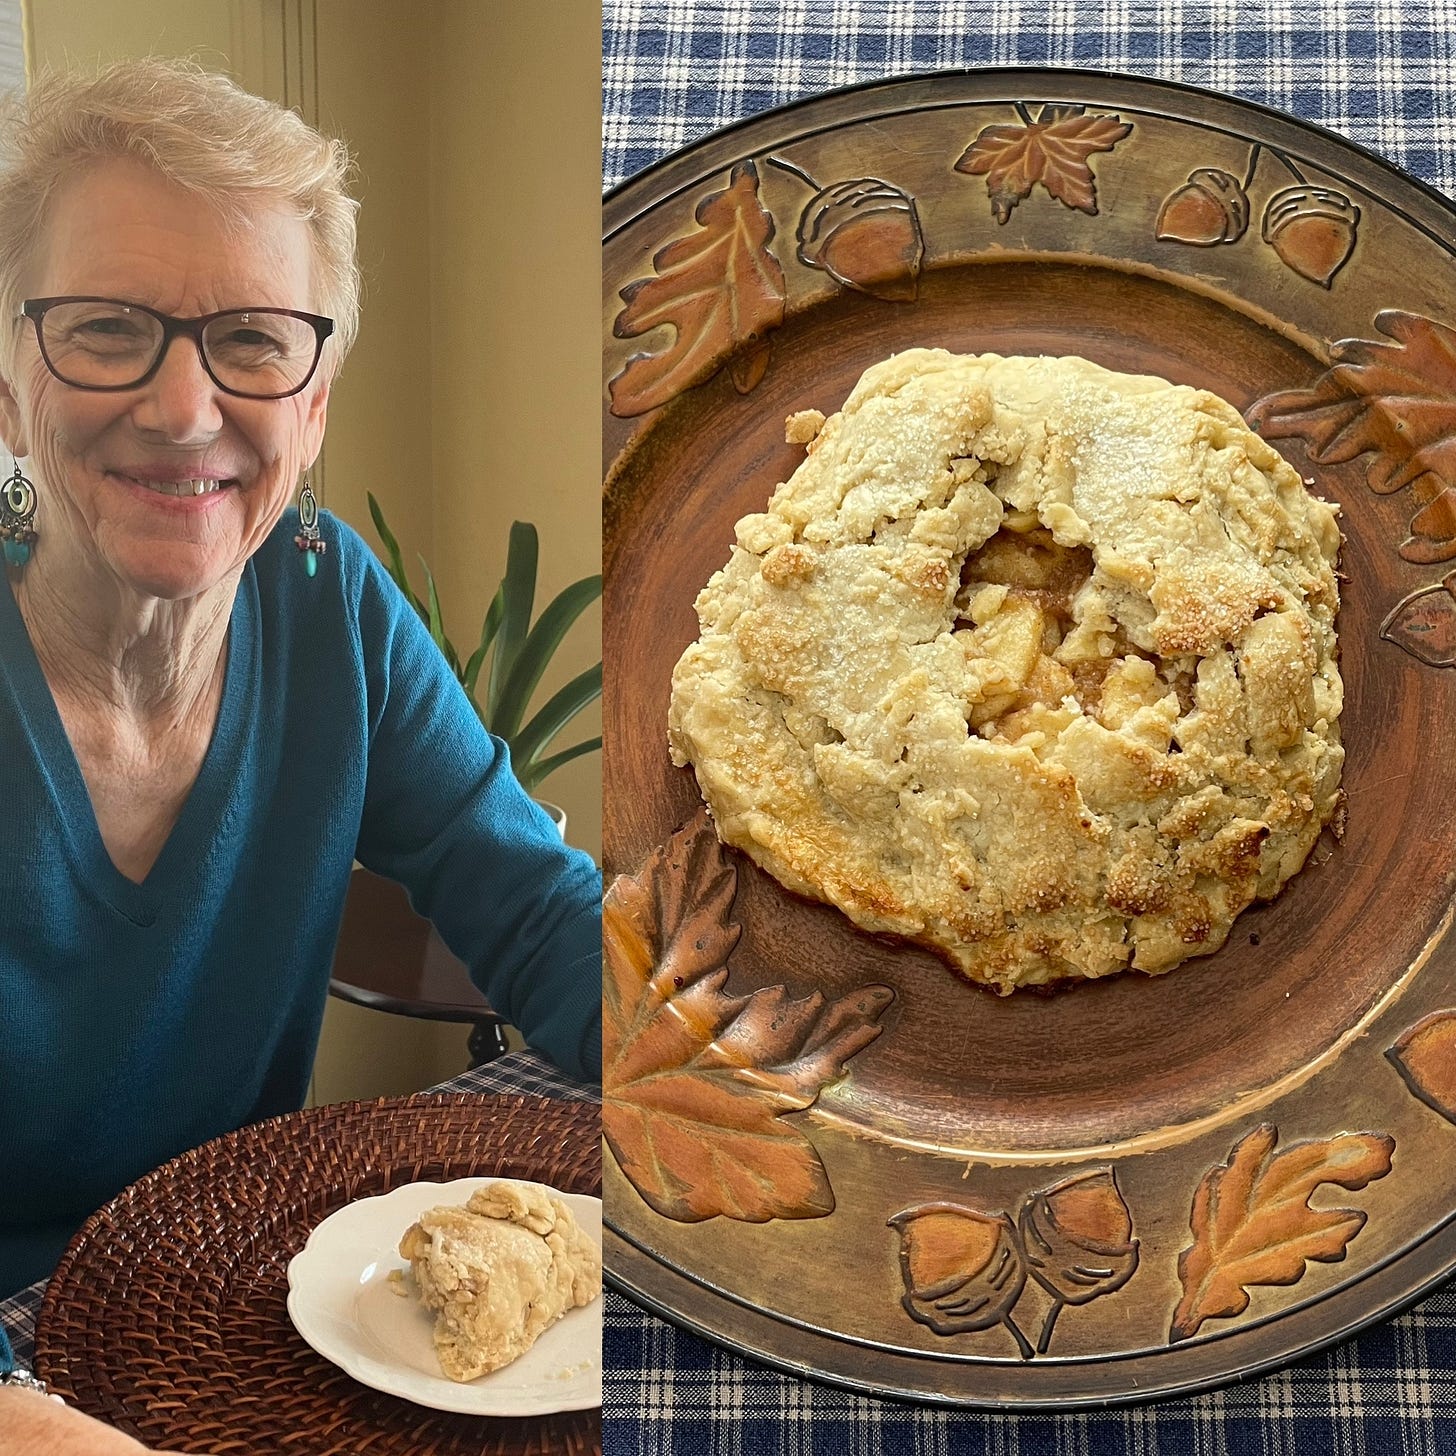 M.A. Hastings, wearing an aqua blue v-neck sweater, is seated at a dining room table. There is  a slice of the apple galette she refers to in the poem in front of her on a small white plate that is scalloped around the edges.  The second picture in the gallery features the entire apple galette on a decorative plate that is the size of a charger.  The plate is brownish orange, with raised oak leaves, and acorns around the plate’s edge.  The plate is on a navy blue and cream colored French plaid table cover.